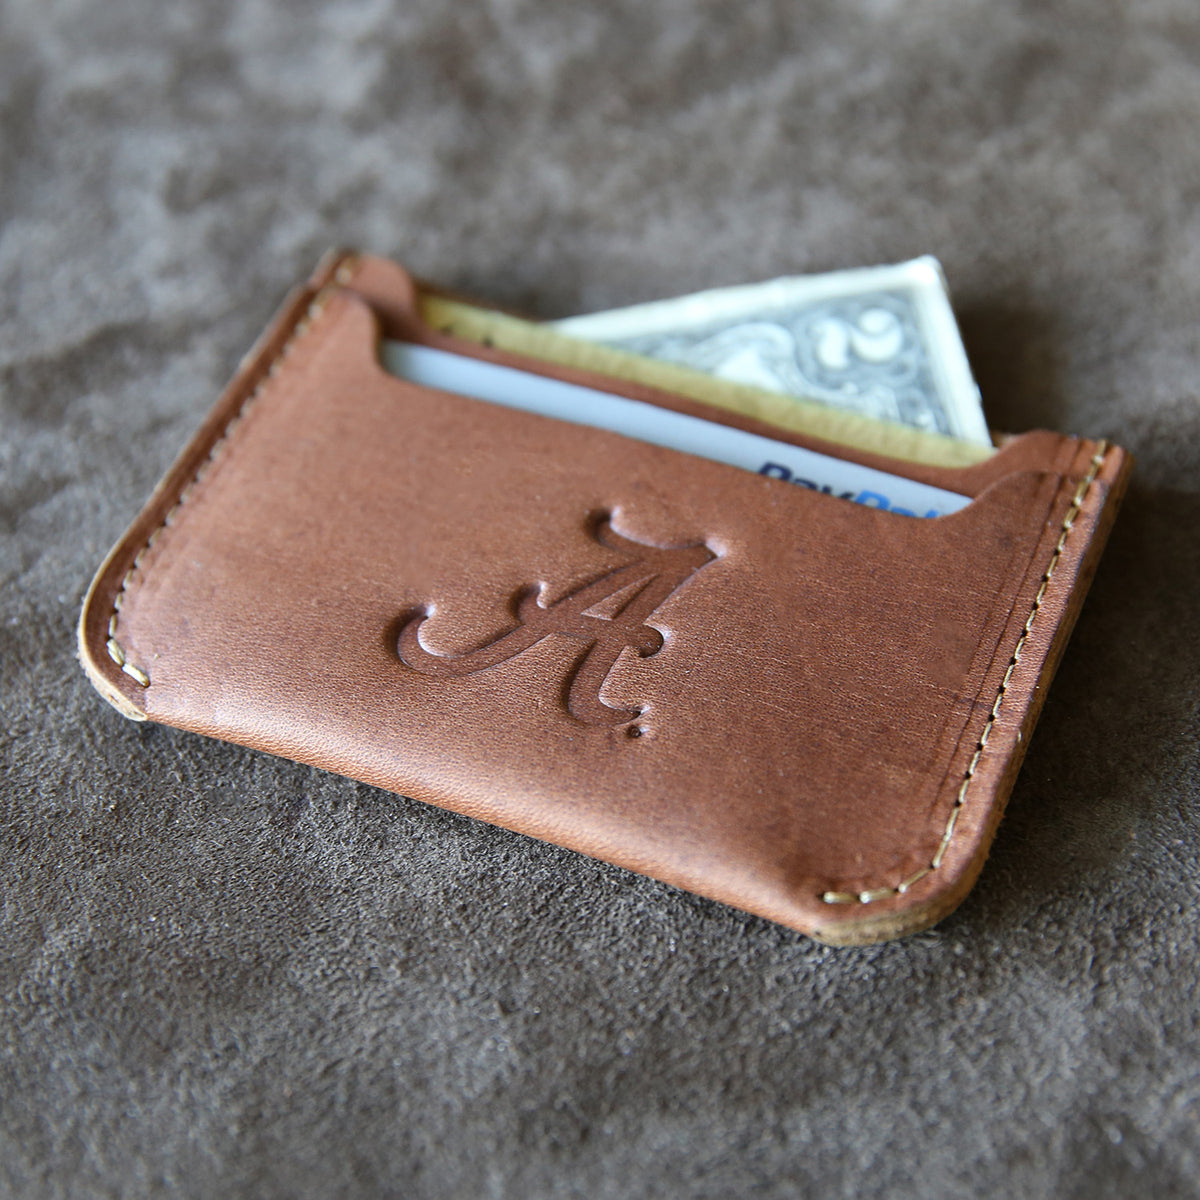 The Officially Licensed Alabama Bradford Front Pocket Double Sleeve Fine Leather Wallet